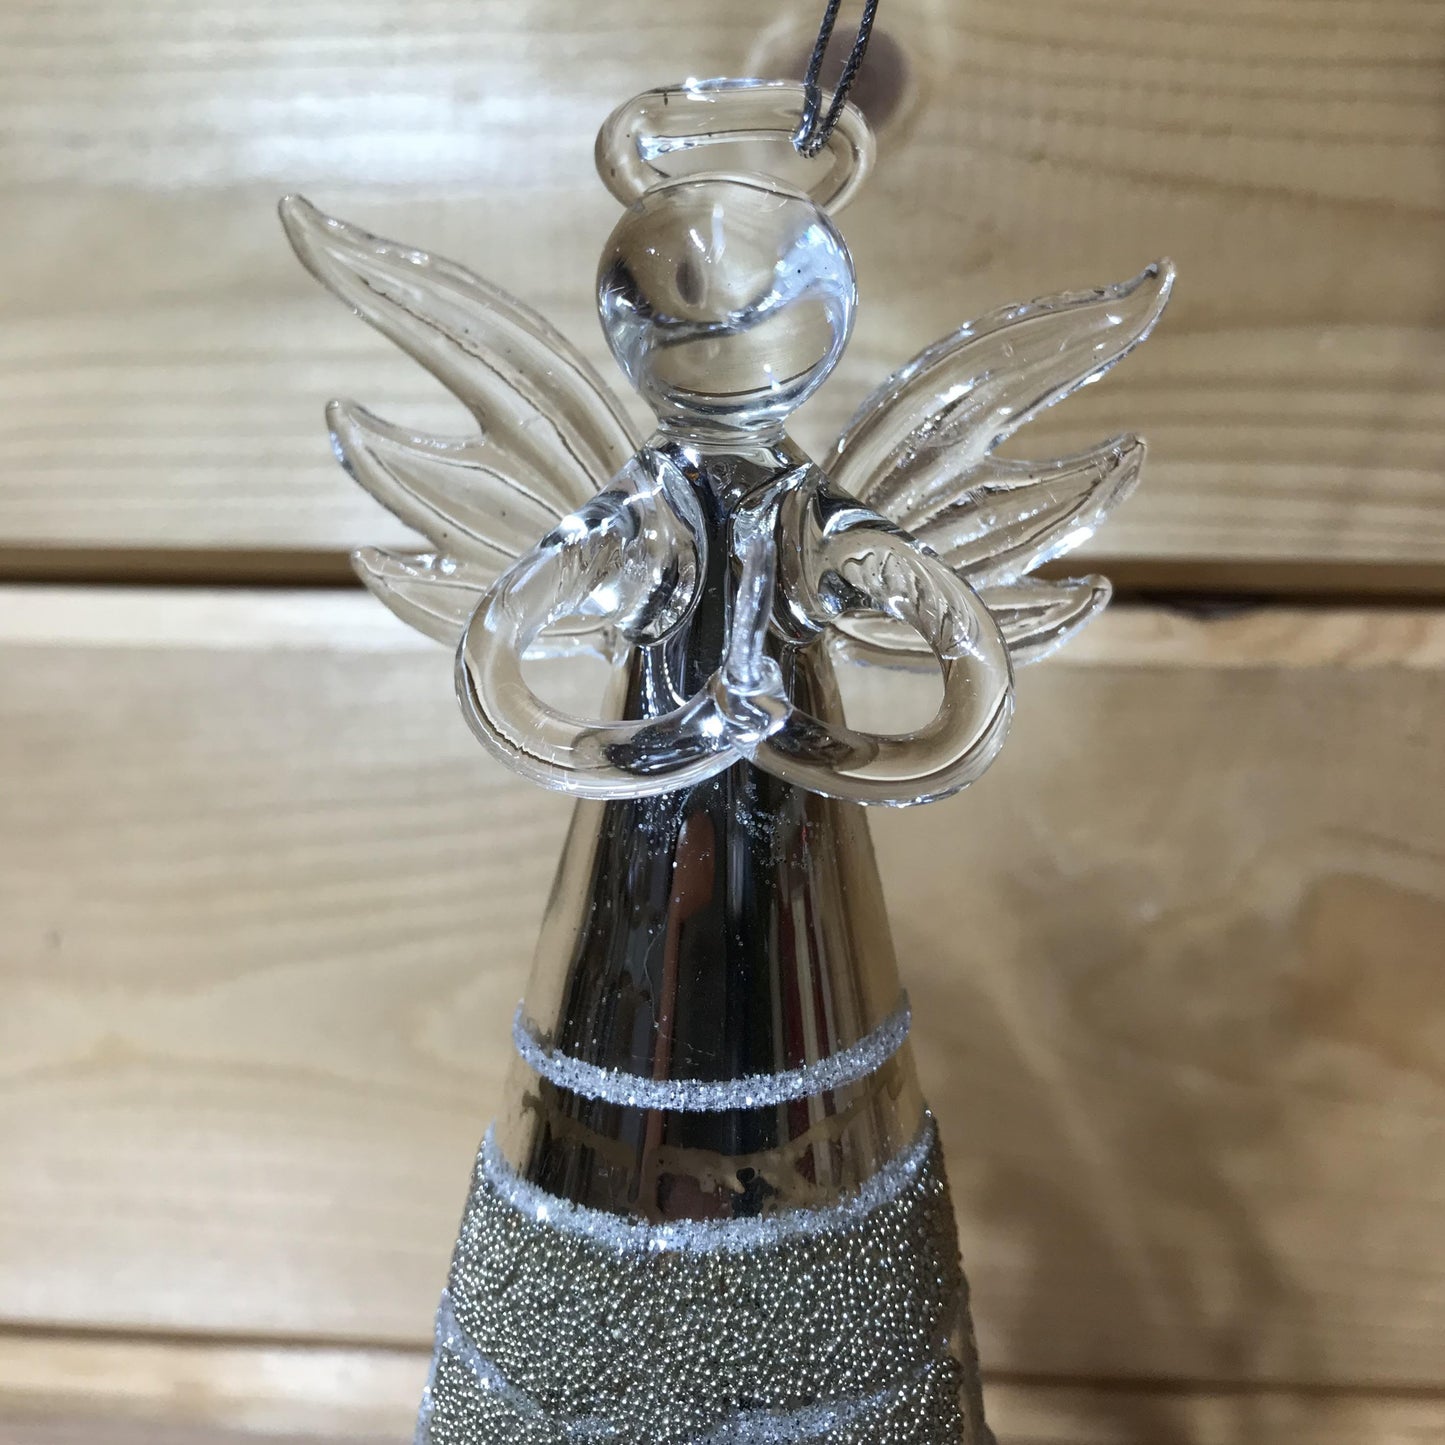 This stunning glass antique effect angel with clasped hands, decorated with beading and glitter bindis will be the perfect finishing touch to your Christmas tree!